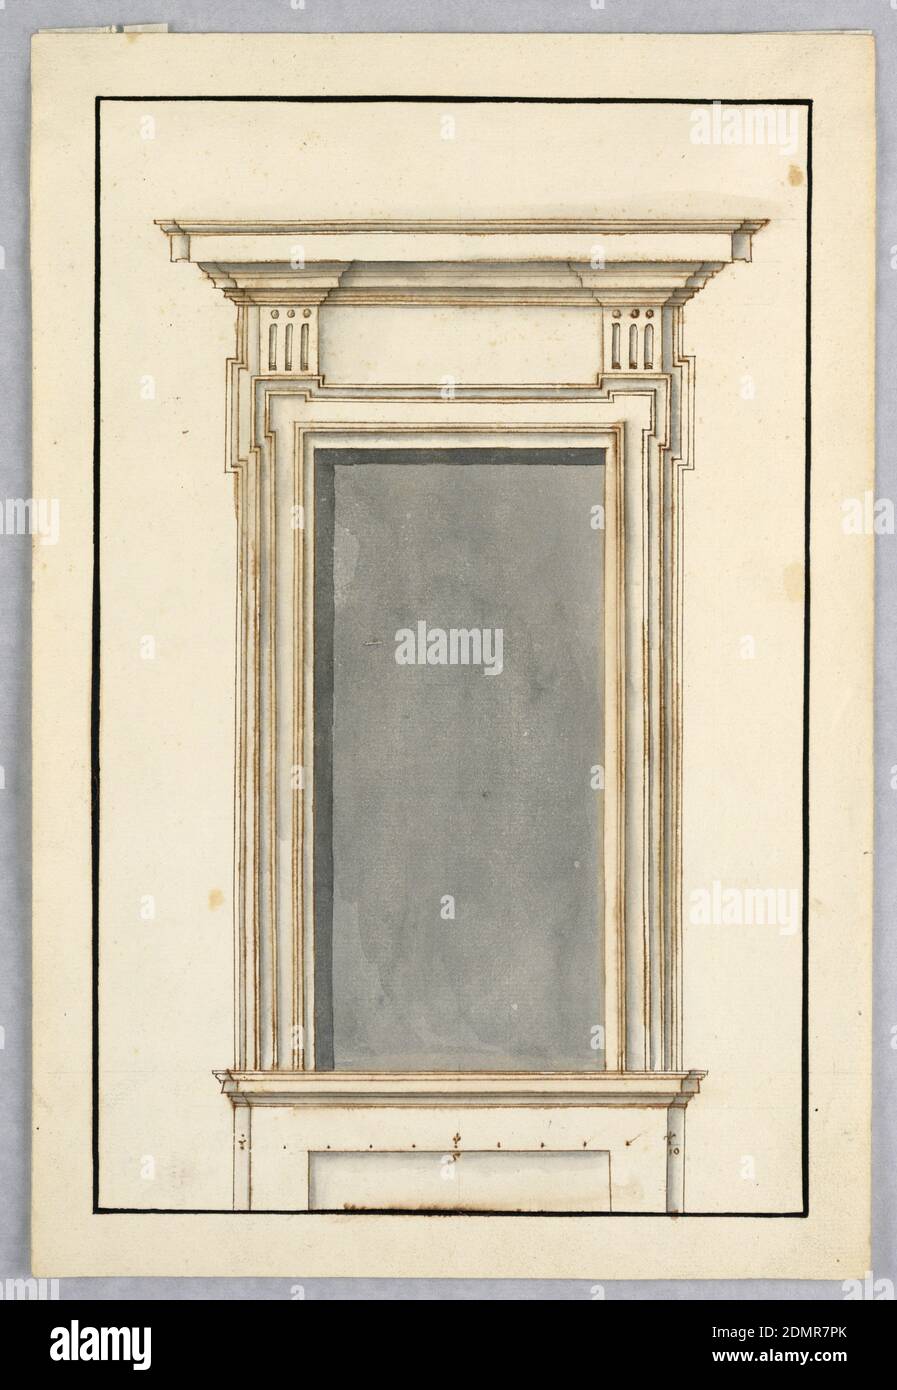 Project for a Window Case, Pen and brown ink, brush and gray wash on off-white laid paper, Elevation of door frame with a straight entablature supported by two consoles with triglyphs. Below is a dado with scale., Italy, 1650–1700, architecture, Drawing Stock Photo